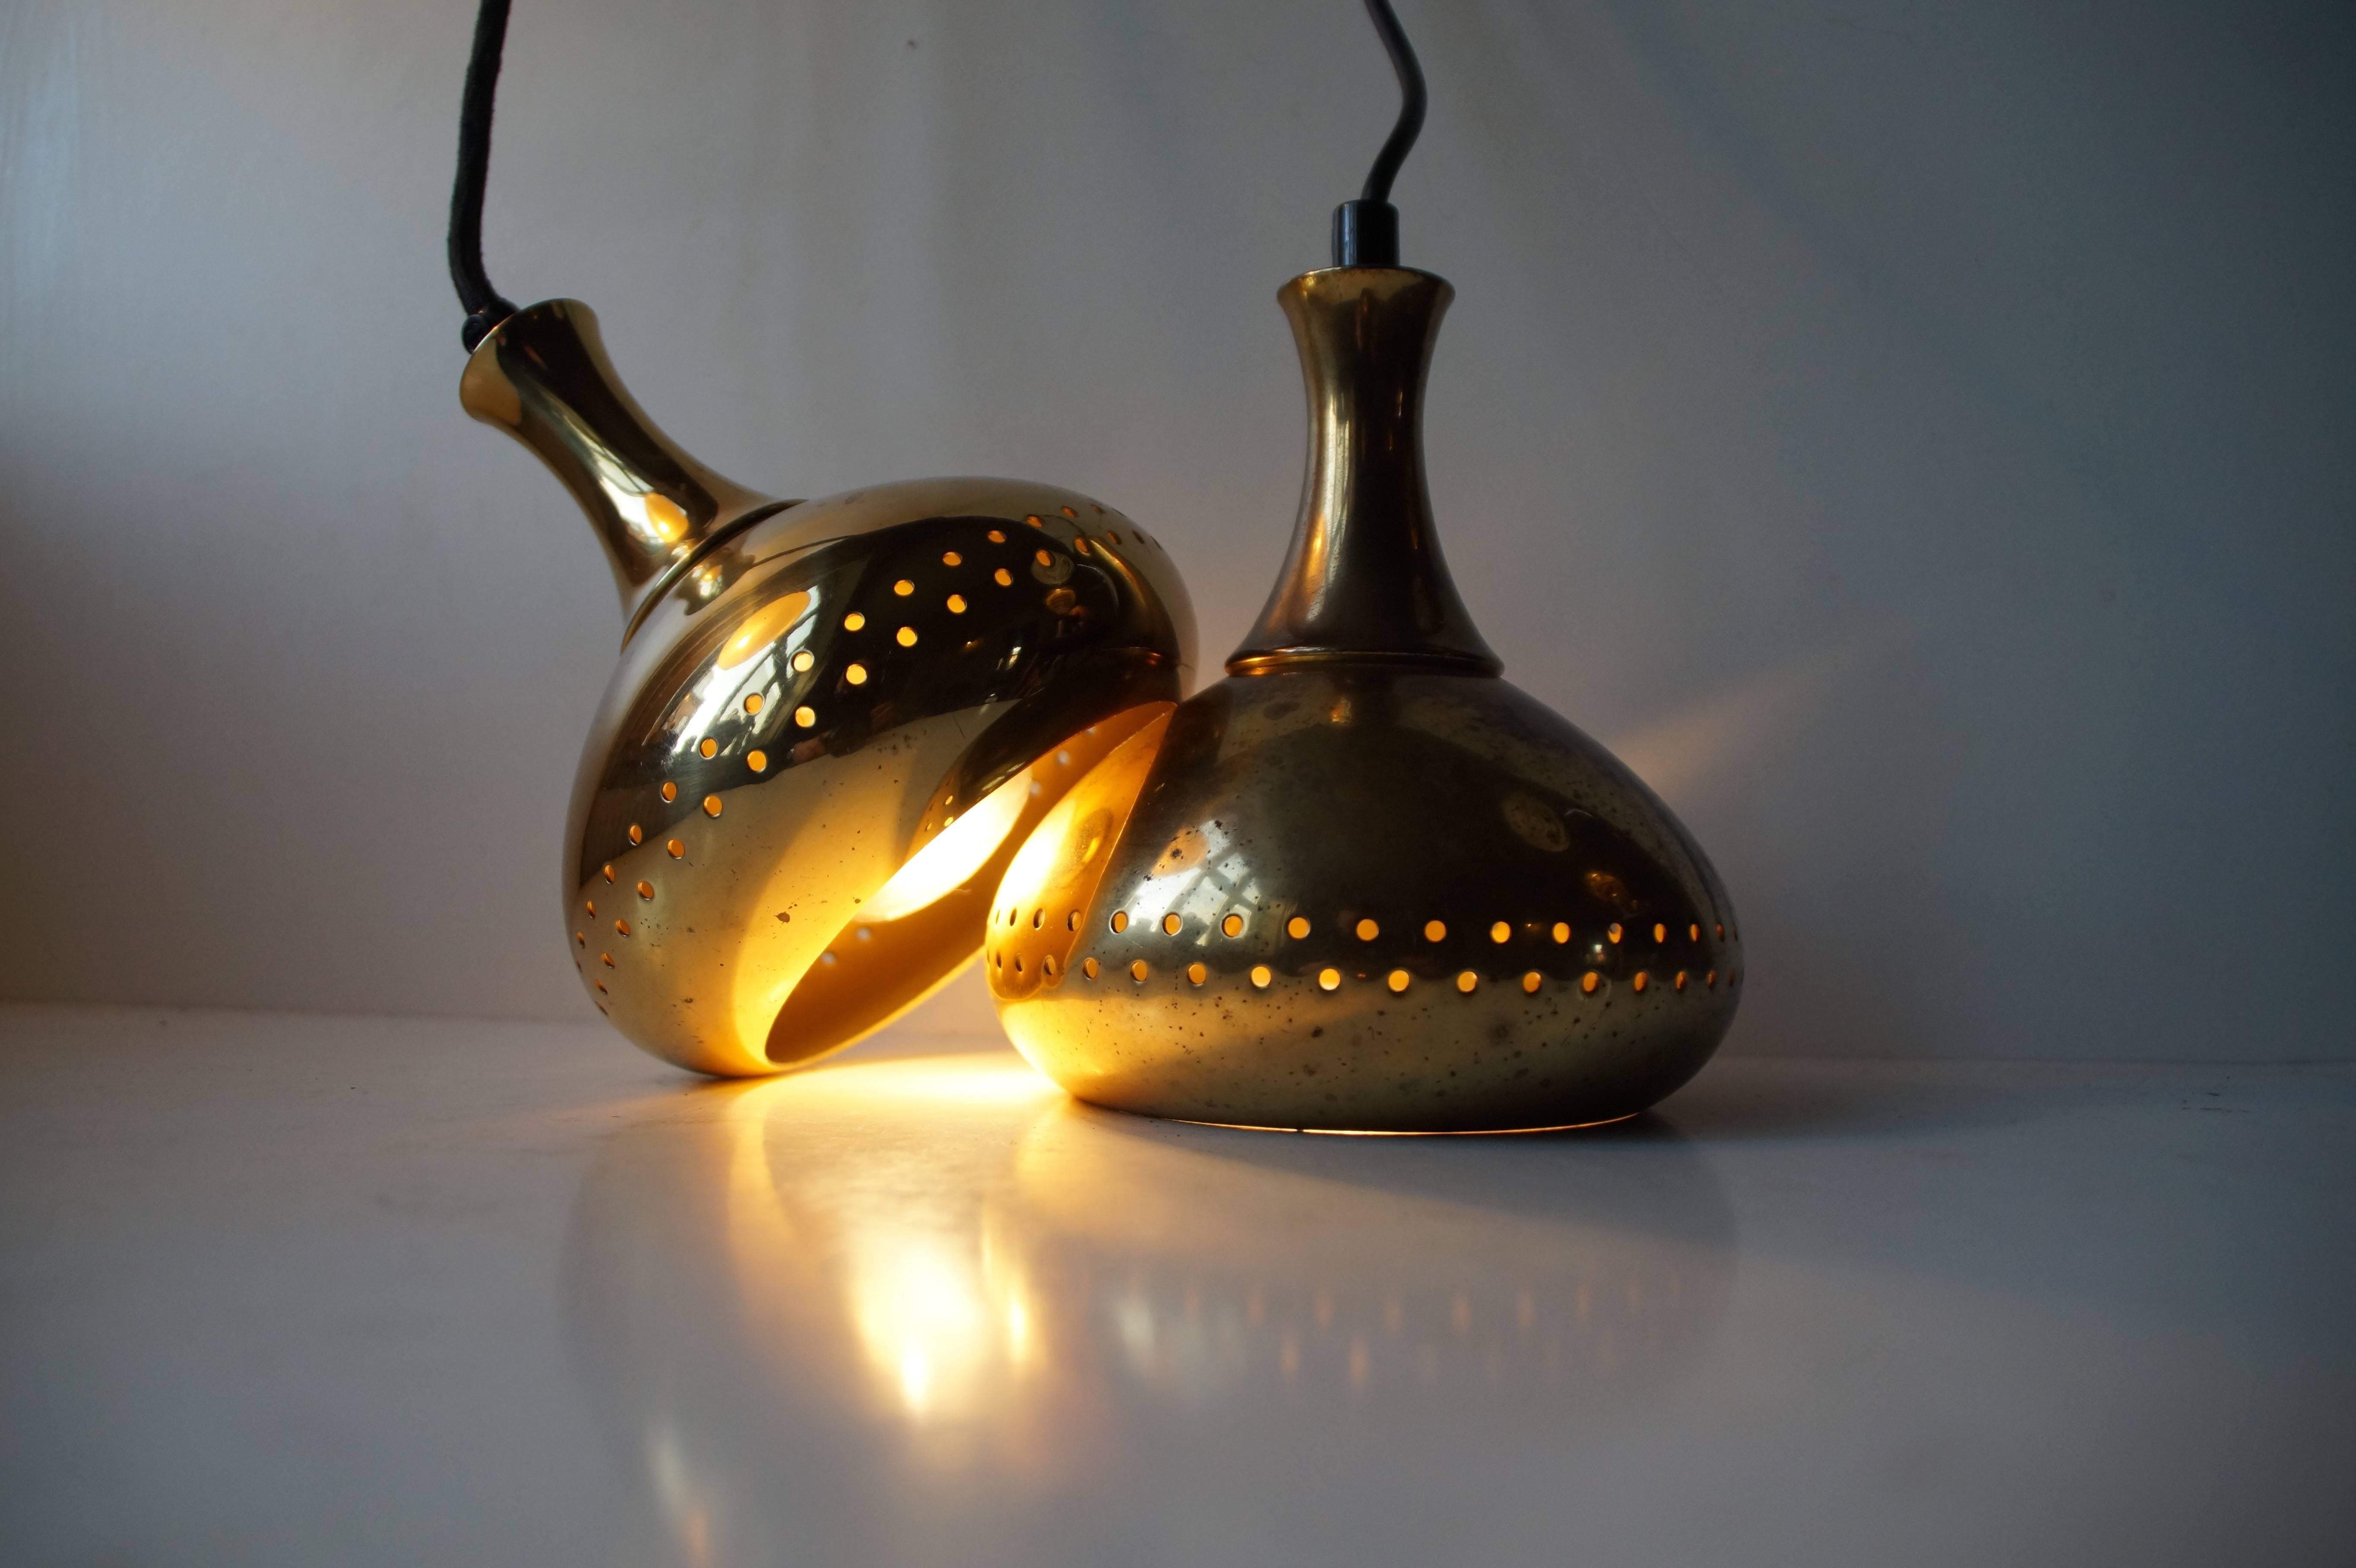 Pair of Small Brass Pendant Lamps by Hans-Agne Jakobsson for Markaryd AB 1